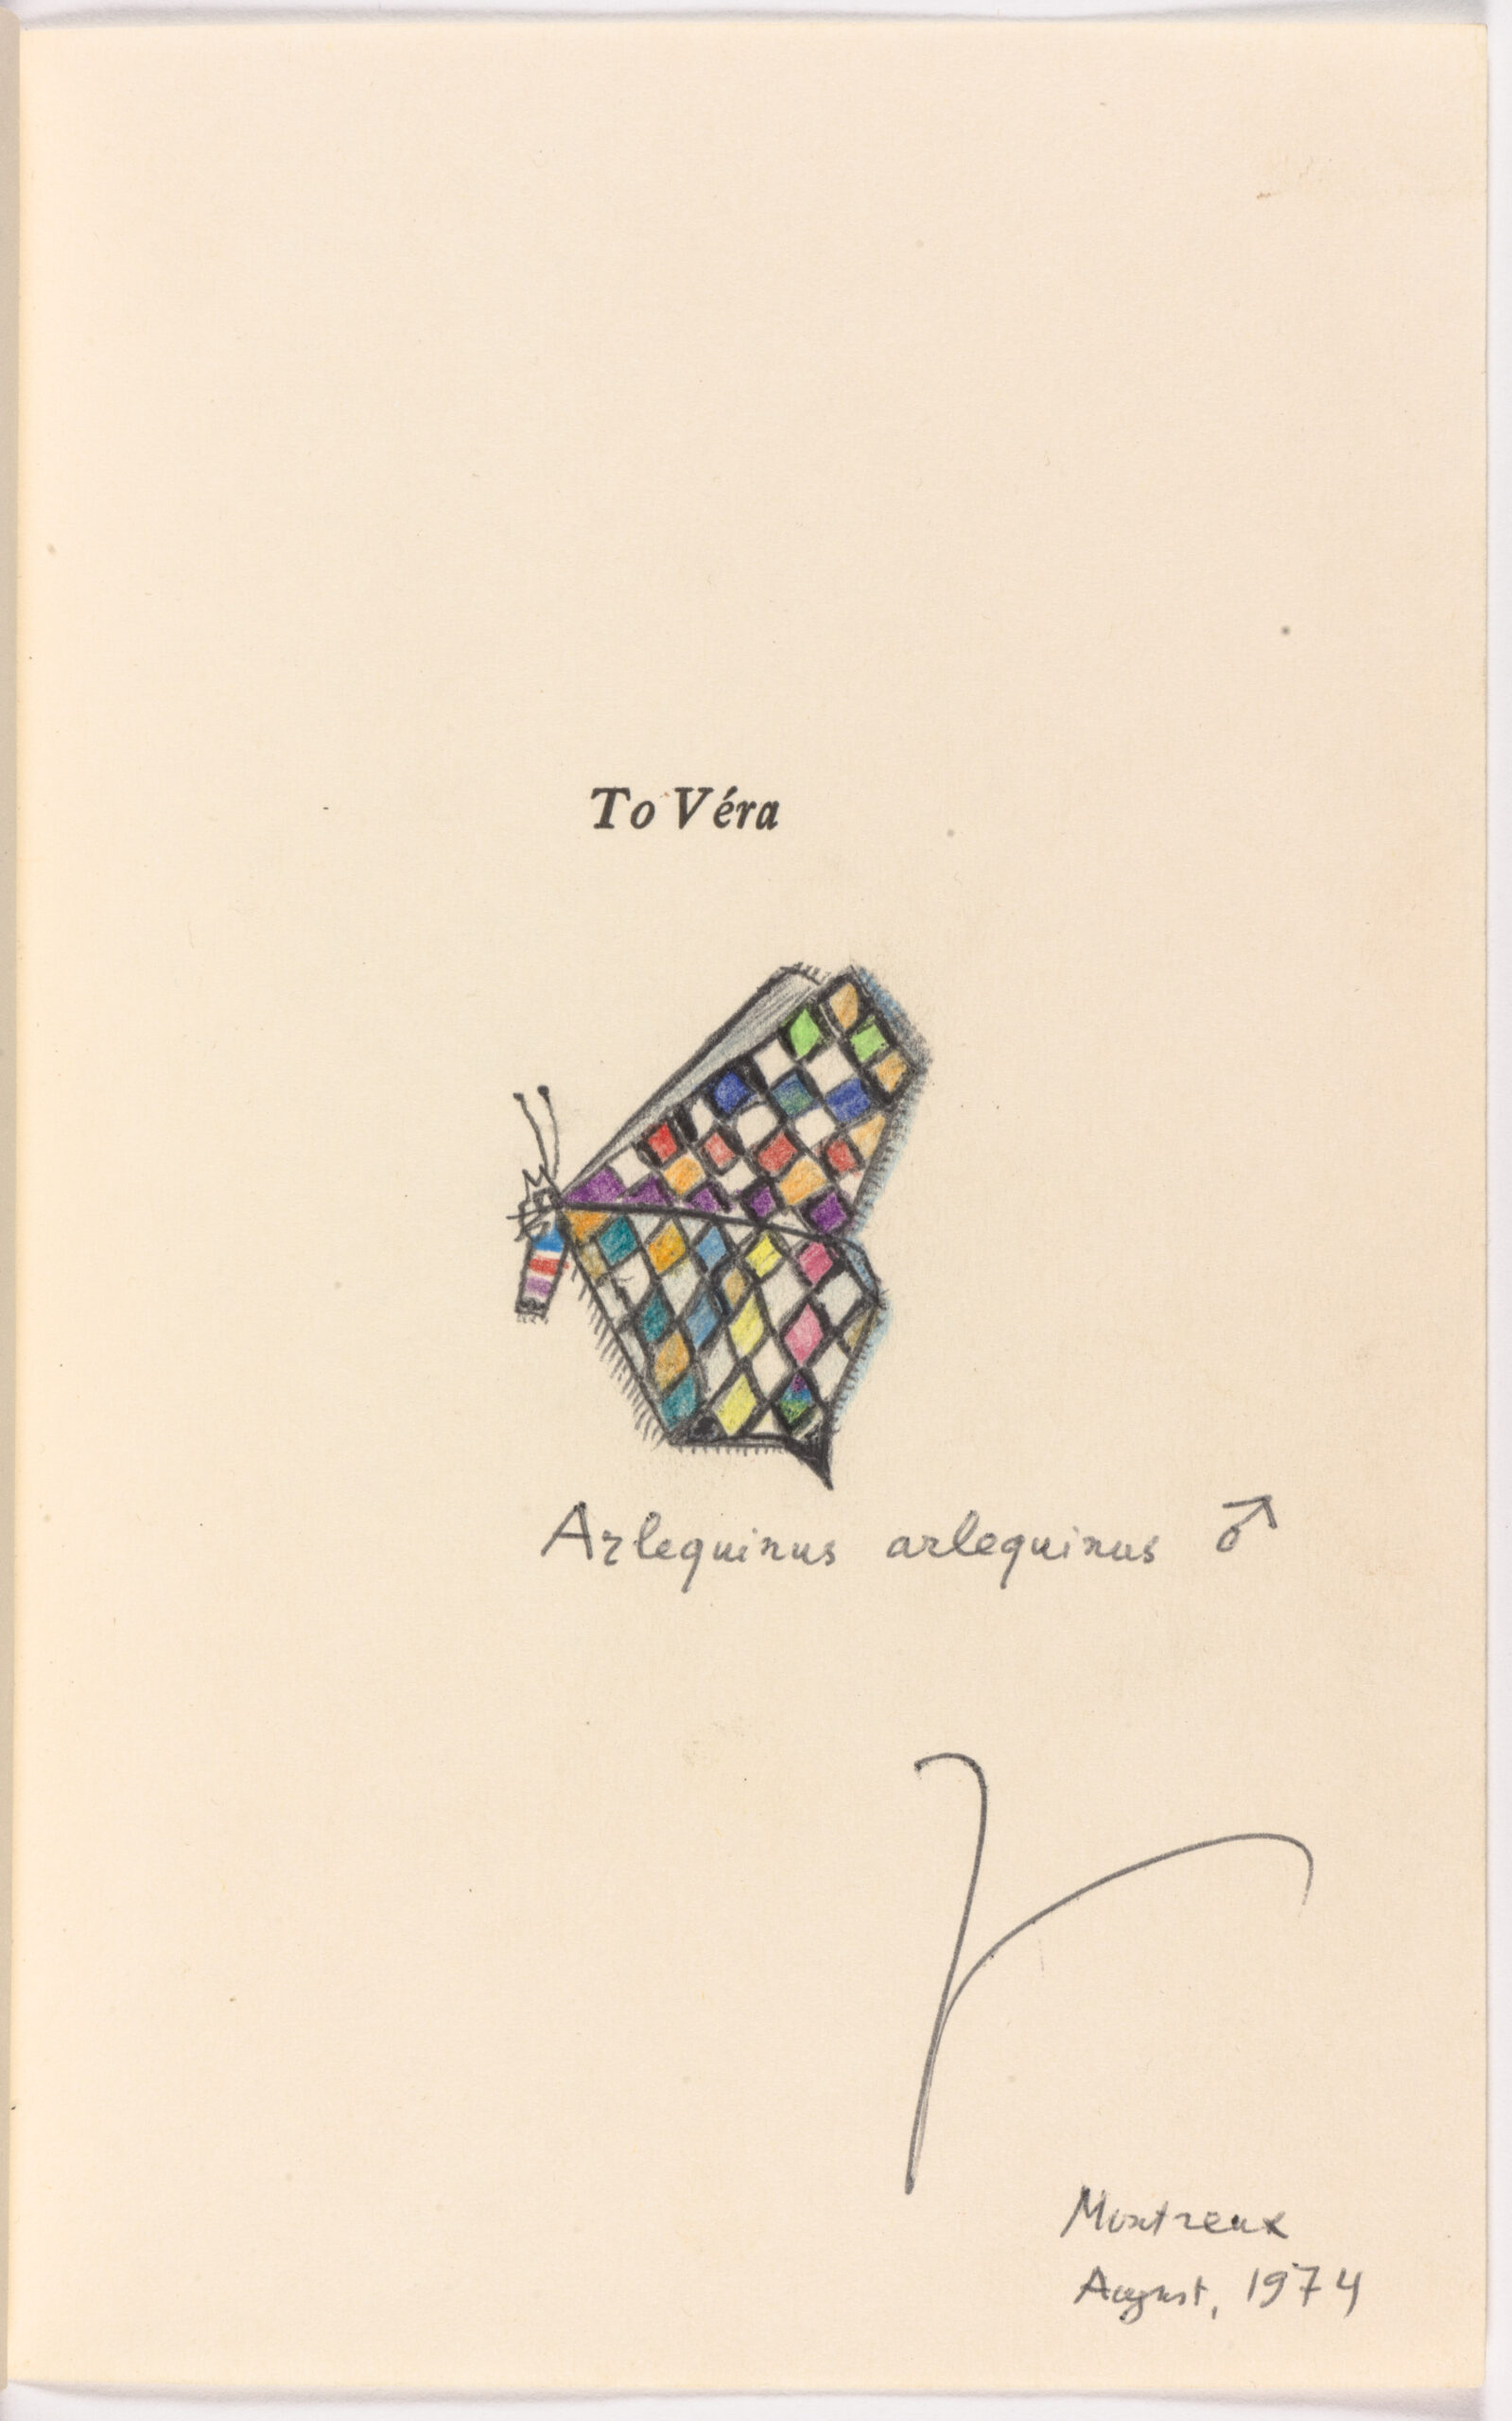 In first printings of his books, Vladimir Nabokov often inscribed dedications to his wife, Vera, and made drawings of butterflies. For the dedication page of Look at the Harlequins, he drew an imaginary species of butterfly, Arlequinus arlequinus. From the Division of Rare and Manuscripts Collection.